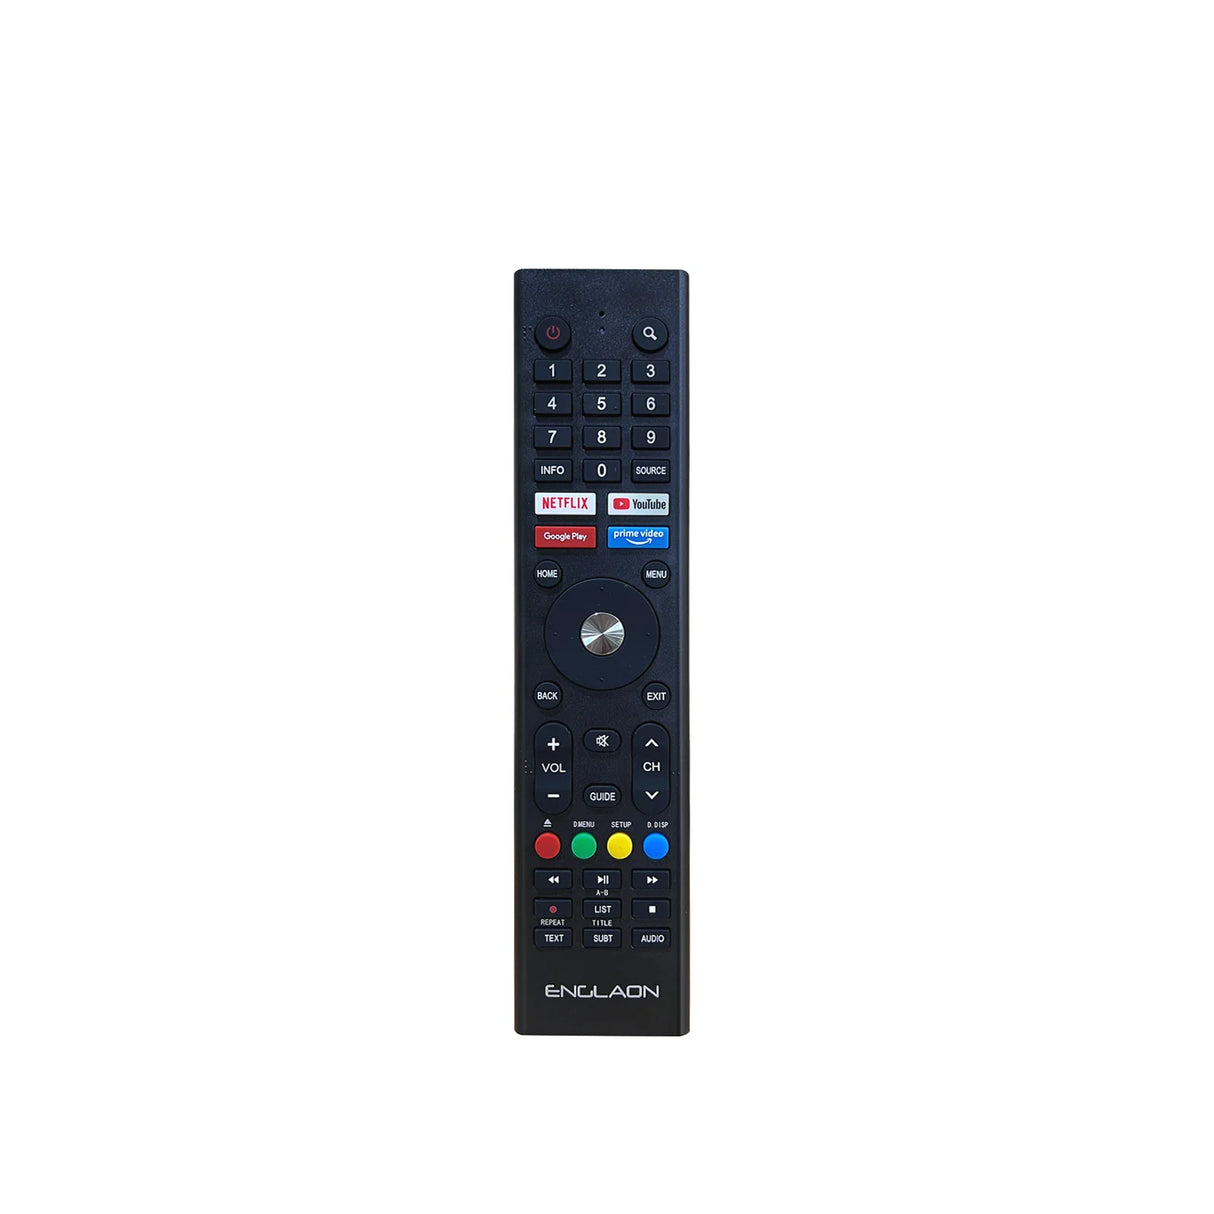 ENGLAON TV remote control for LED TVs (M Series)